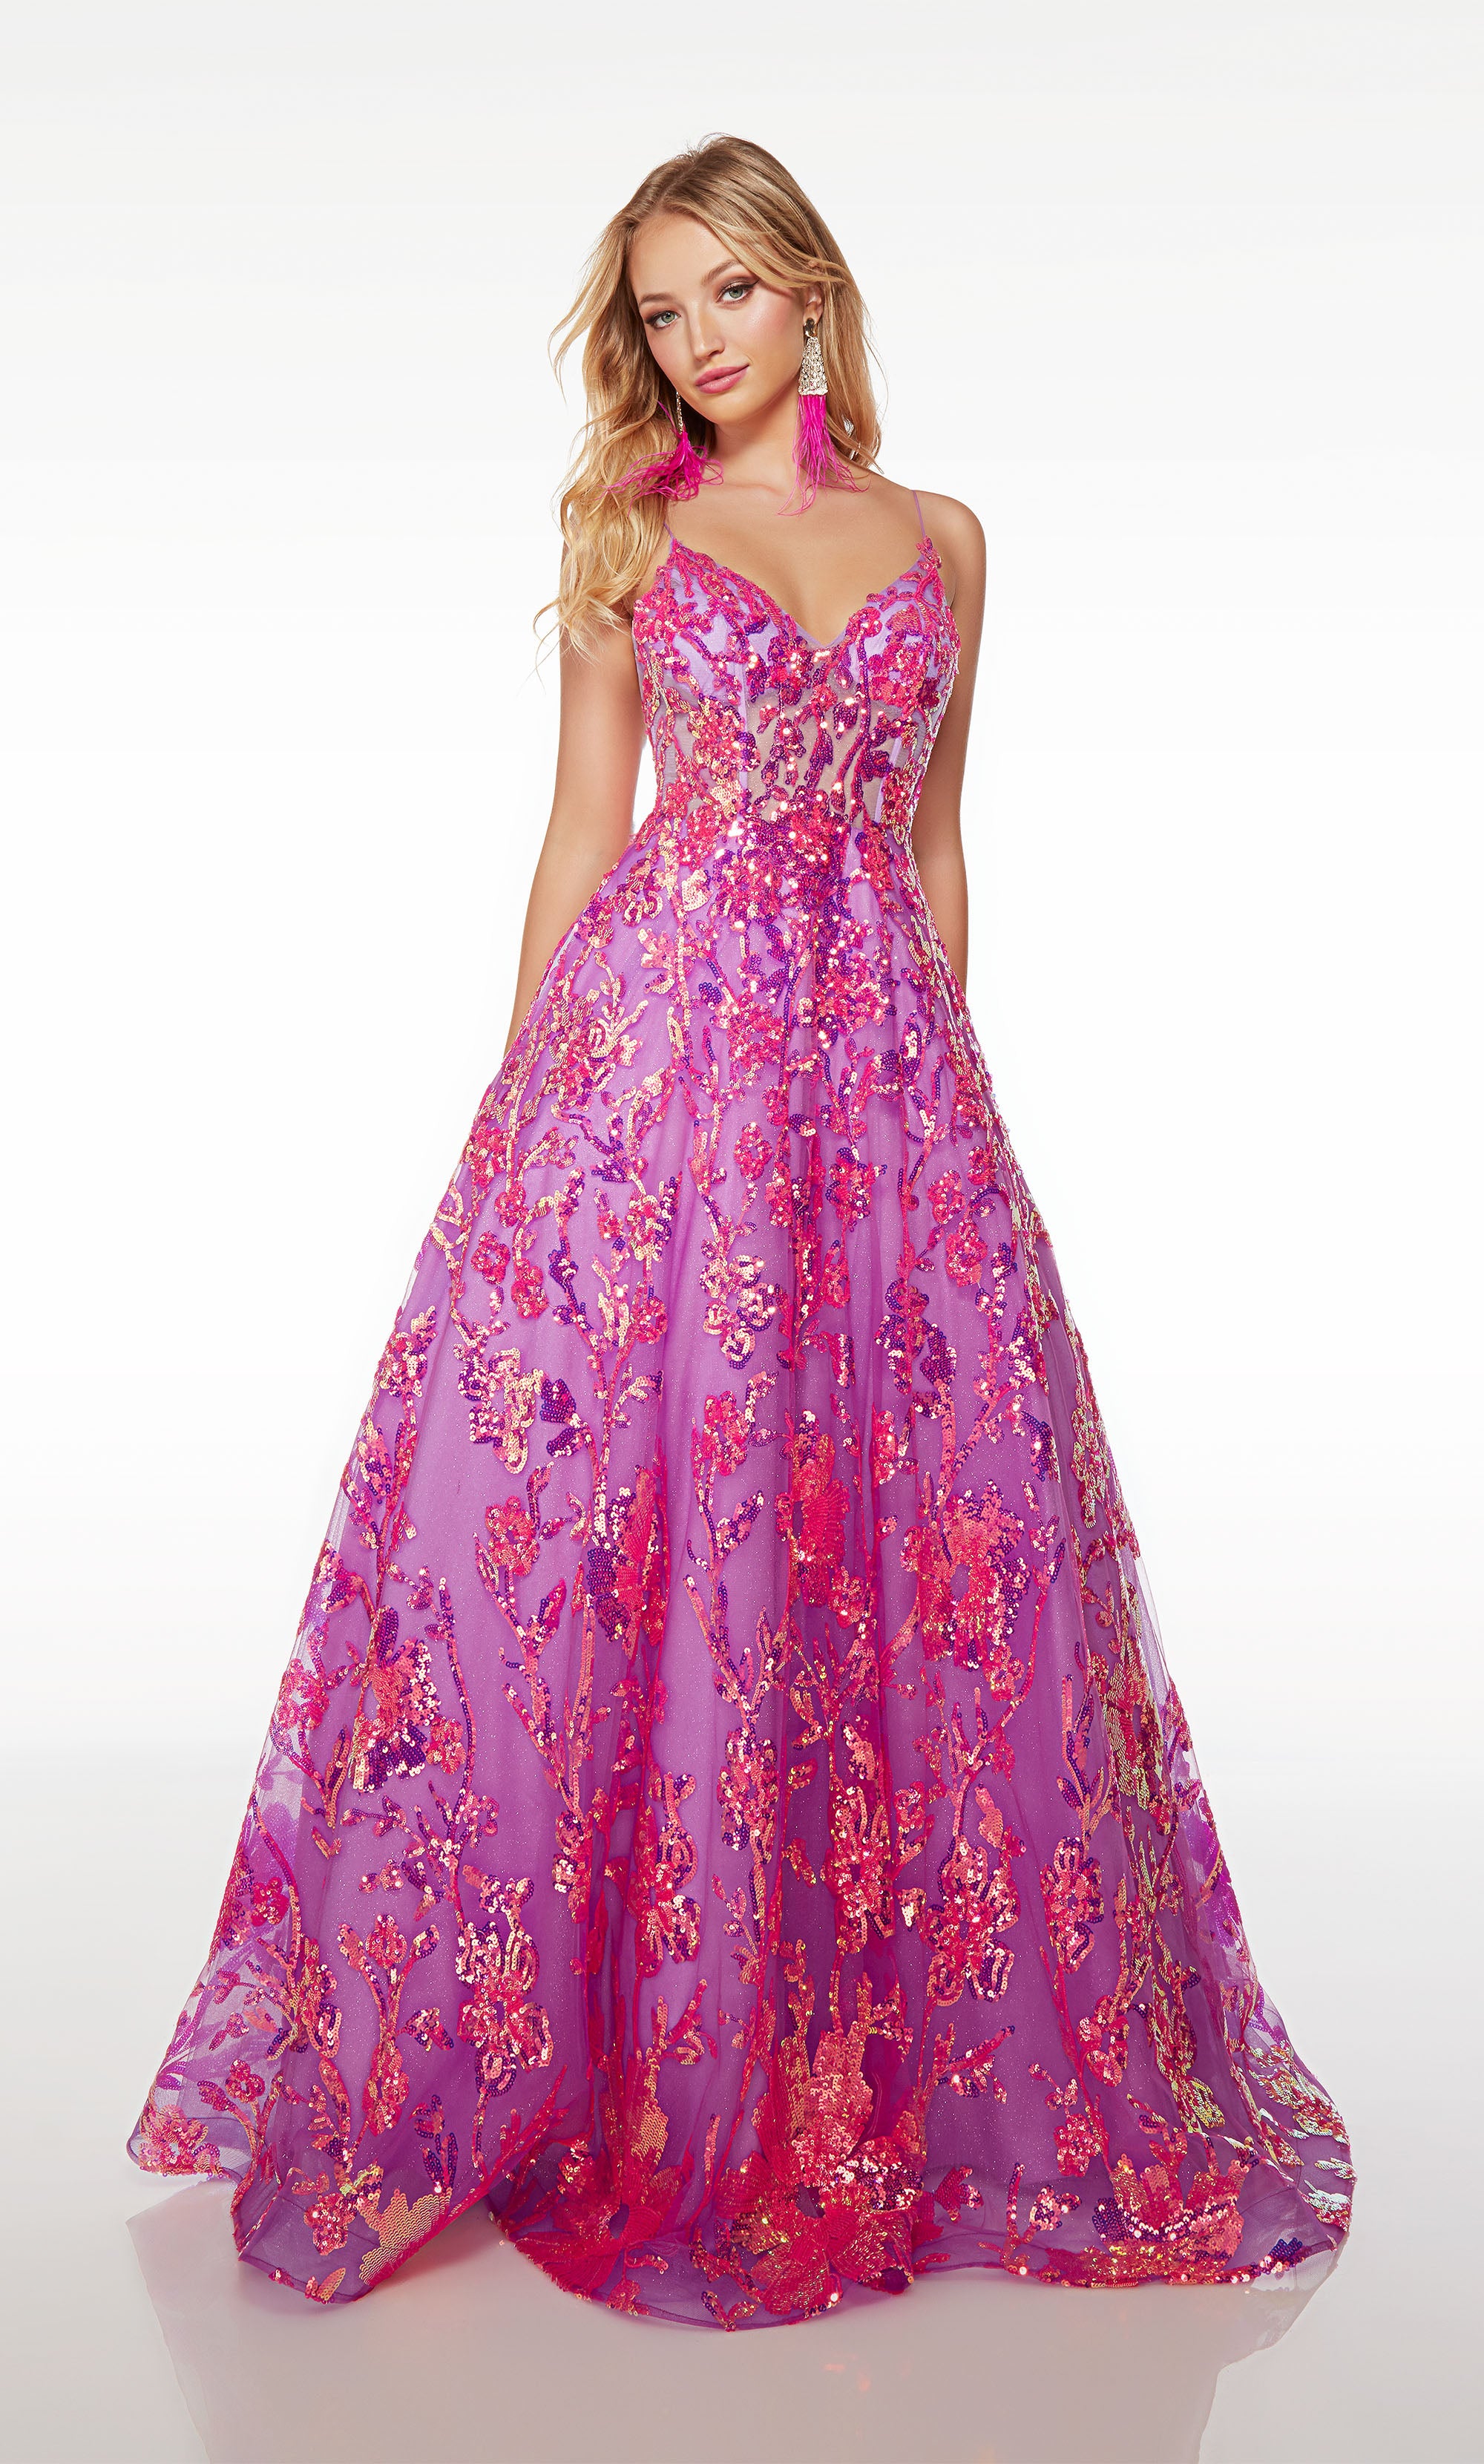 Purple-pink ball gown with an V-neckline, lace-up back, and adorned with beautiful iridescent sequin flowers, creating an enchanting and glamorous look.